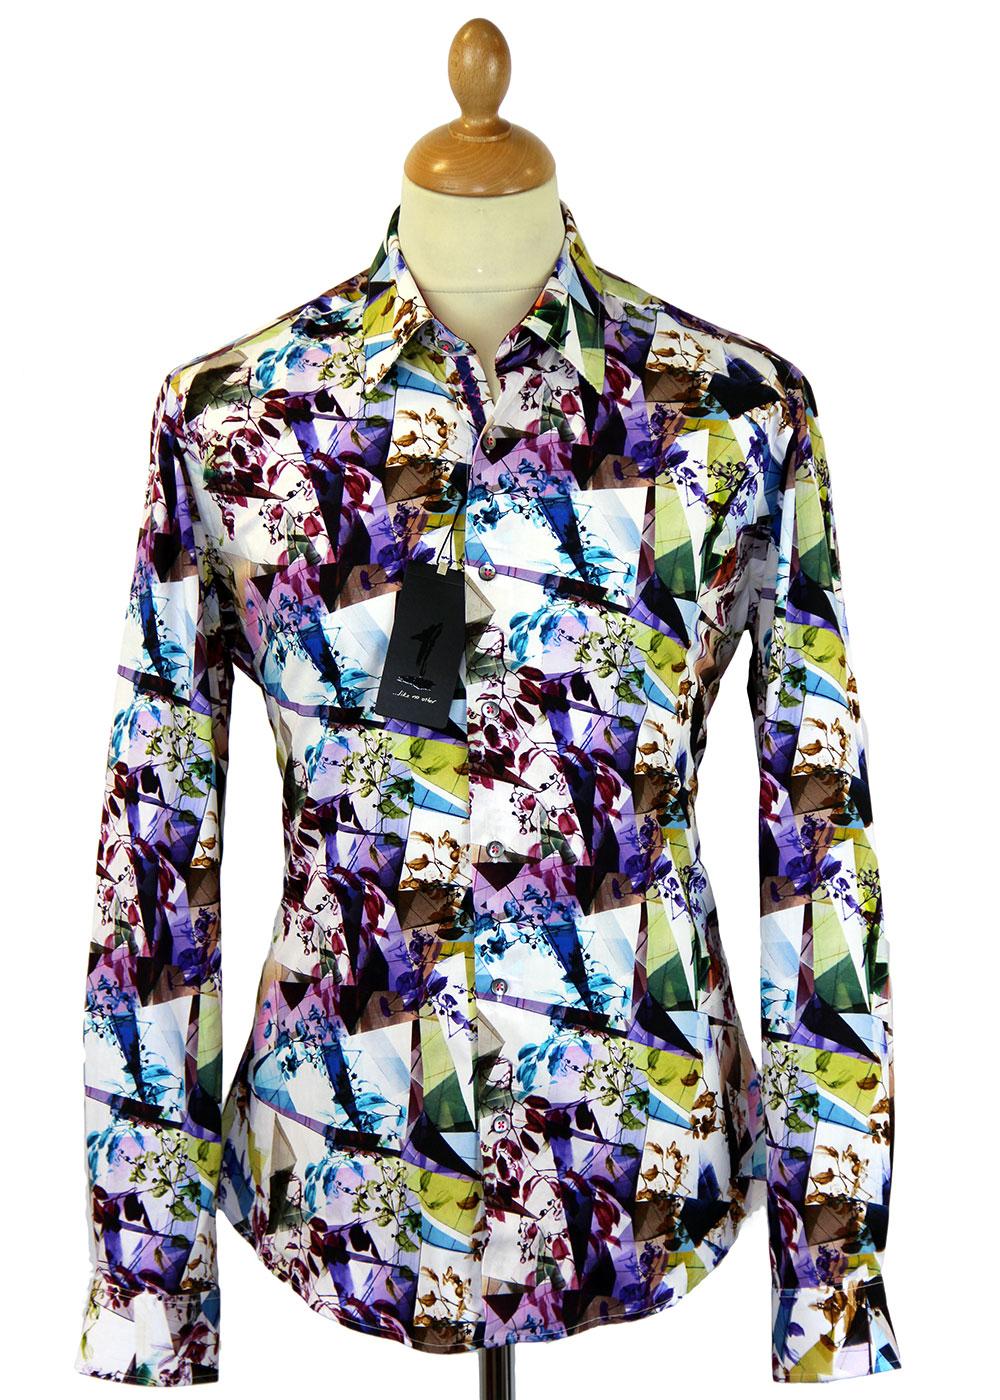 Gargrave 1 LIKE NO OTHER Floral Geometric Shirt